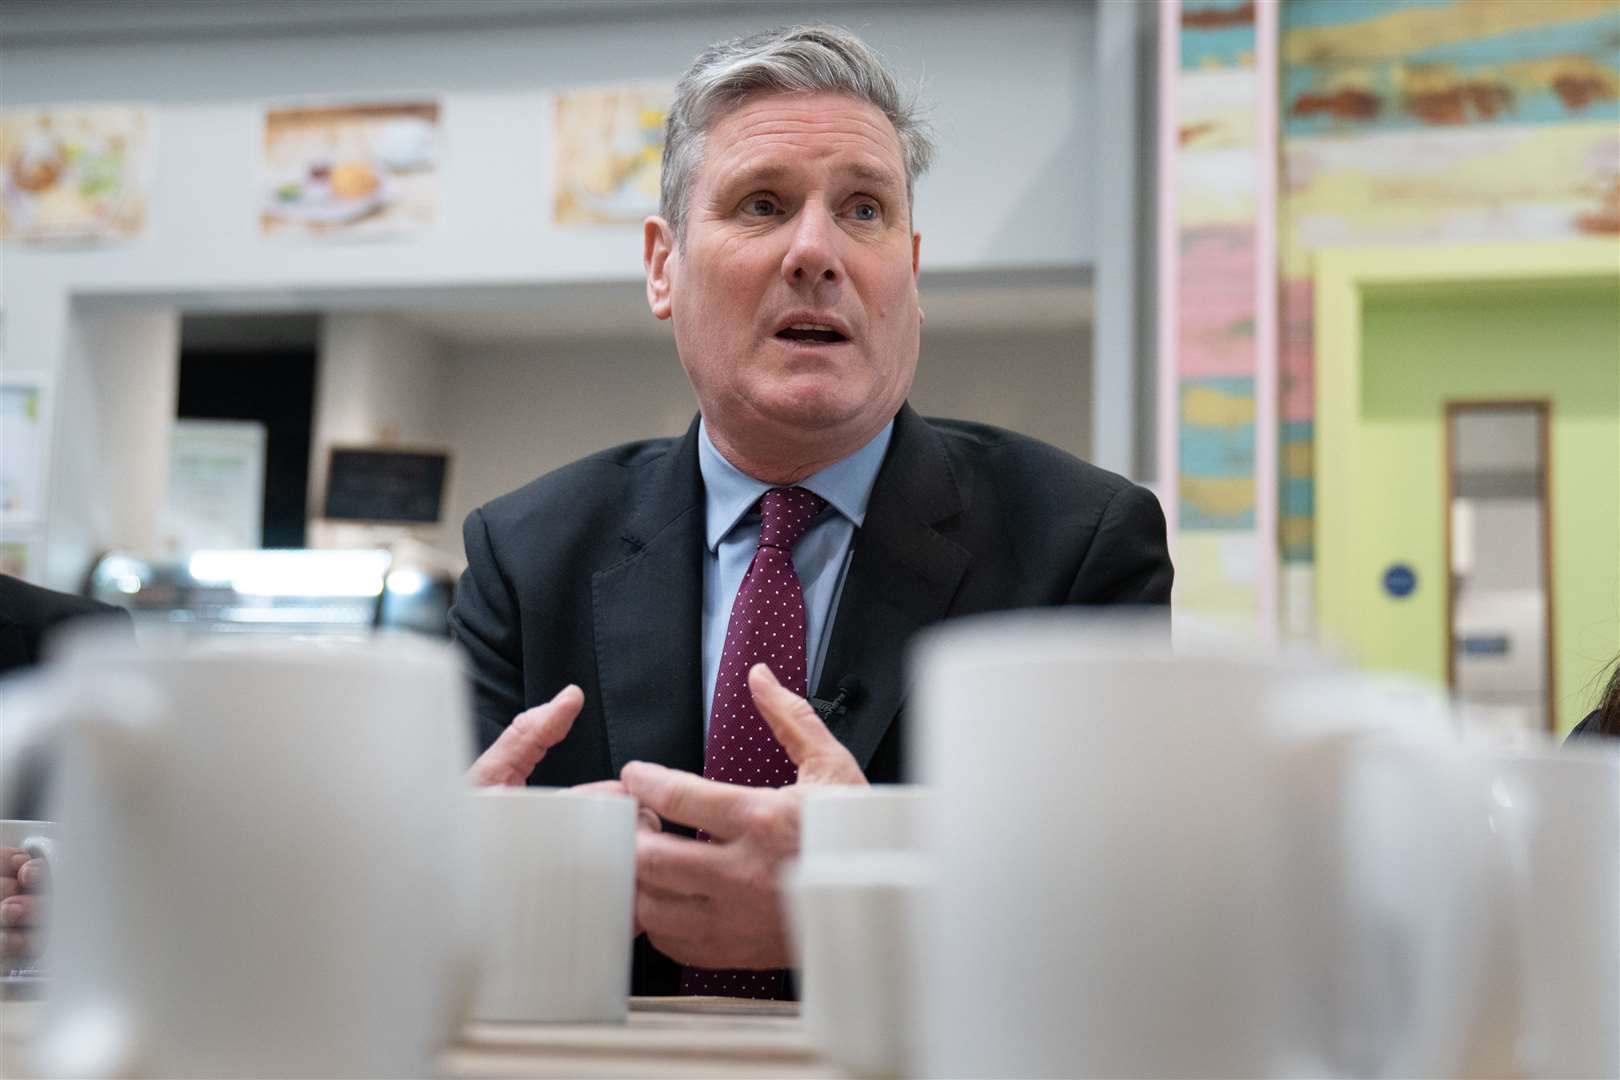 Labour leader Sir Keir Starmer visits the Arc community centre in Scunthorpe (Stefan Rousseau/PA)